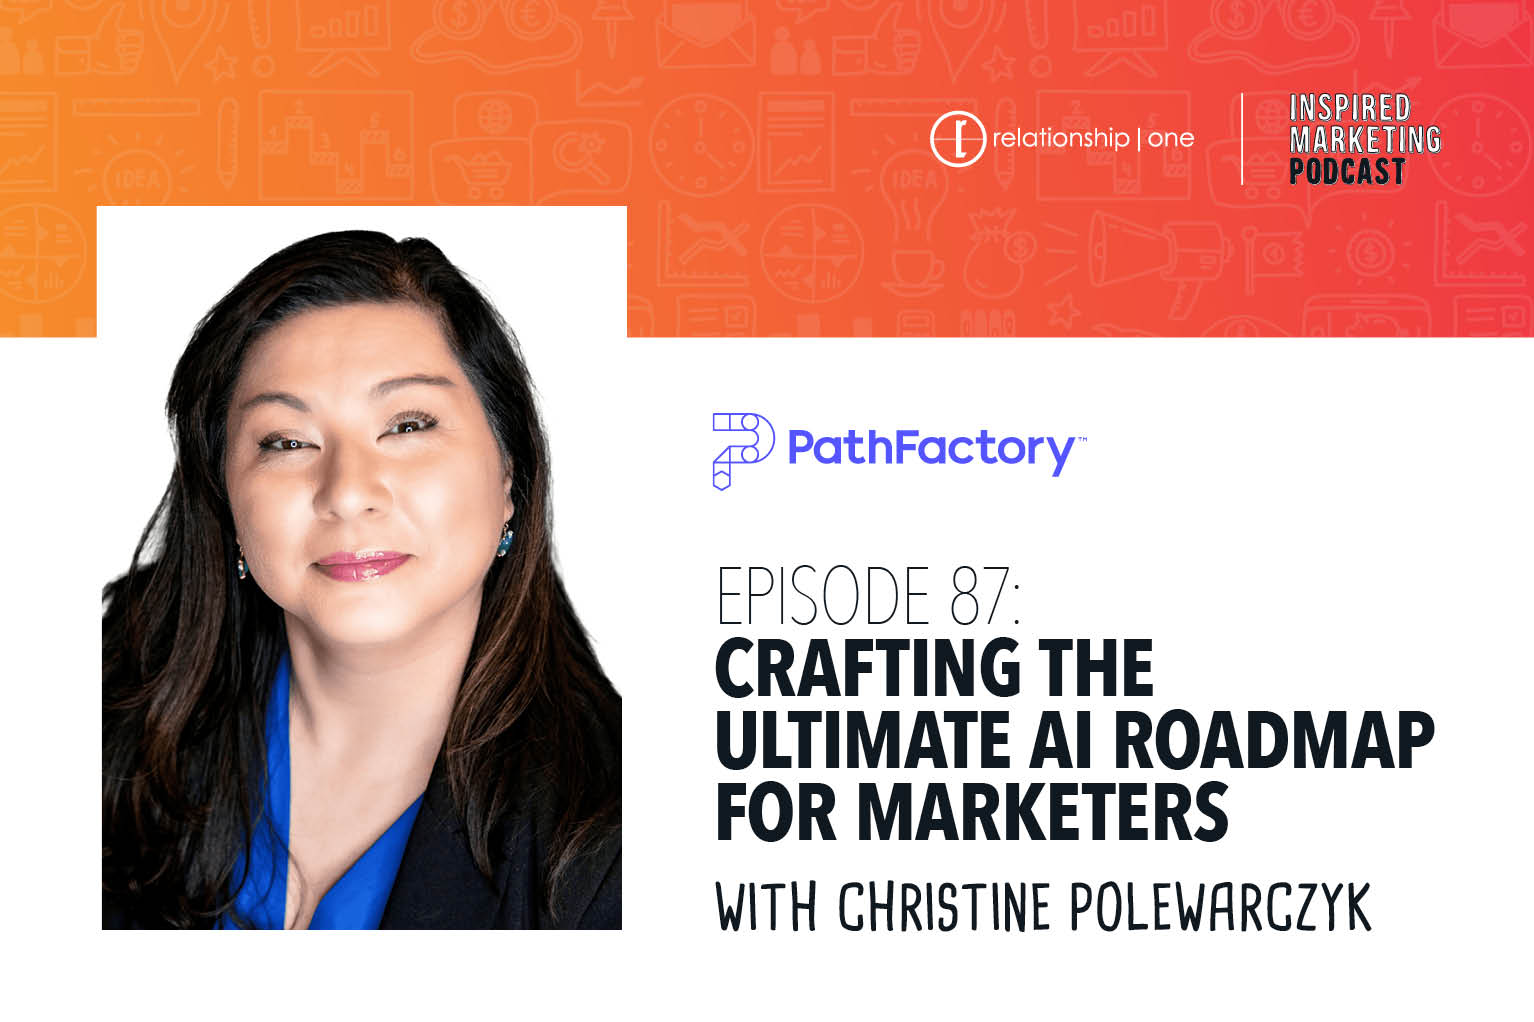 Inspired Marketing: PathFactory’s Christine Polewarczyk on Crafting the Ultimate AI Roadmap for Marketers